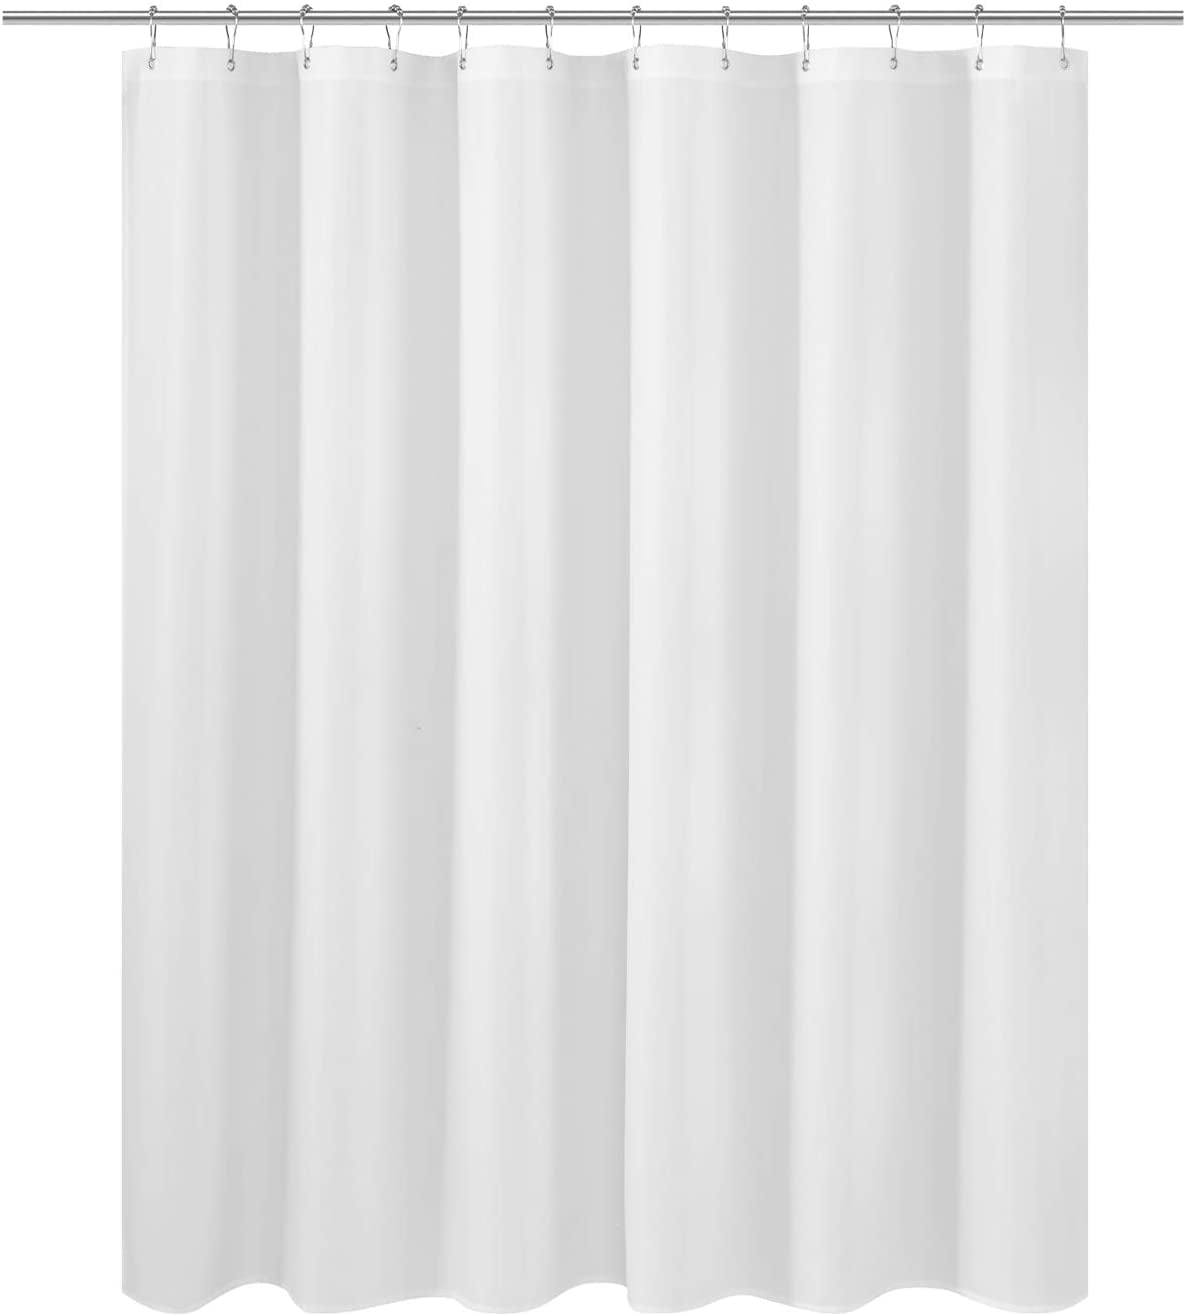 Fabric Shower Curtain Liner 60 Inches, Long Length Shower Curtains